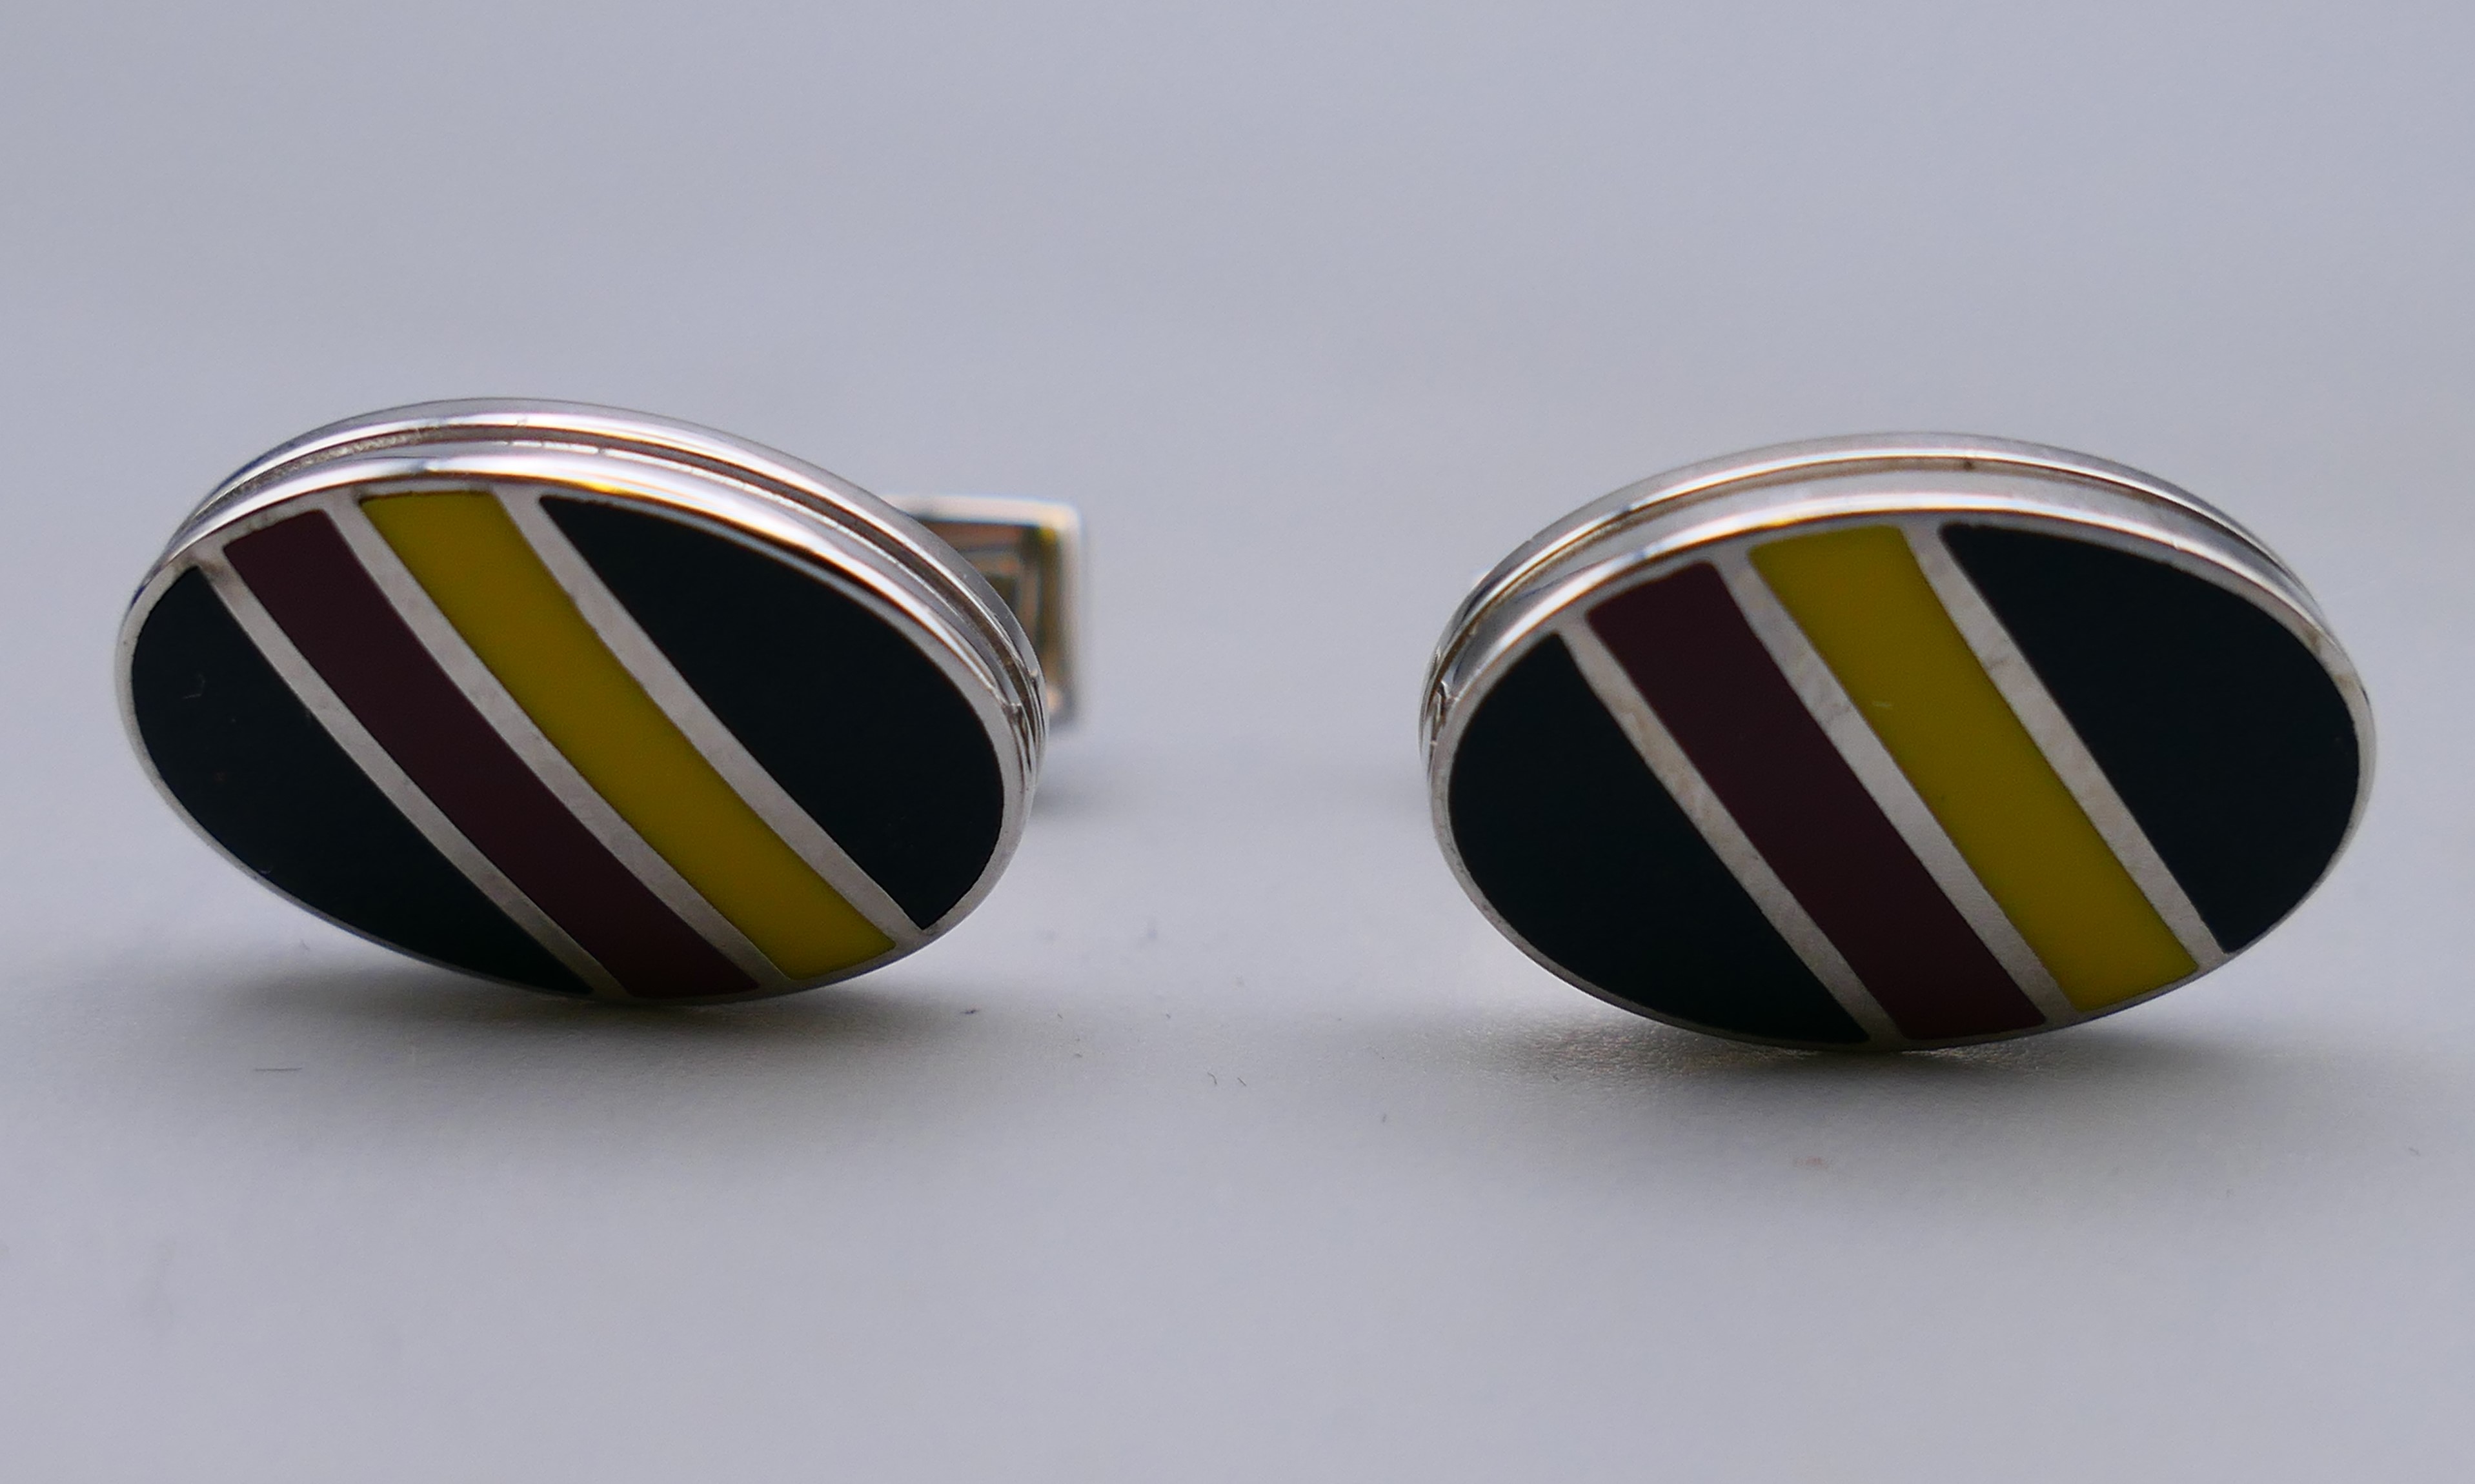 A pair of Hackett cufflinks and a pair of Armani cufflinks, both boxed. - Image 4 of 5